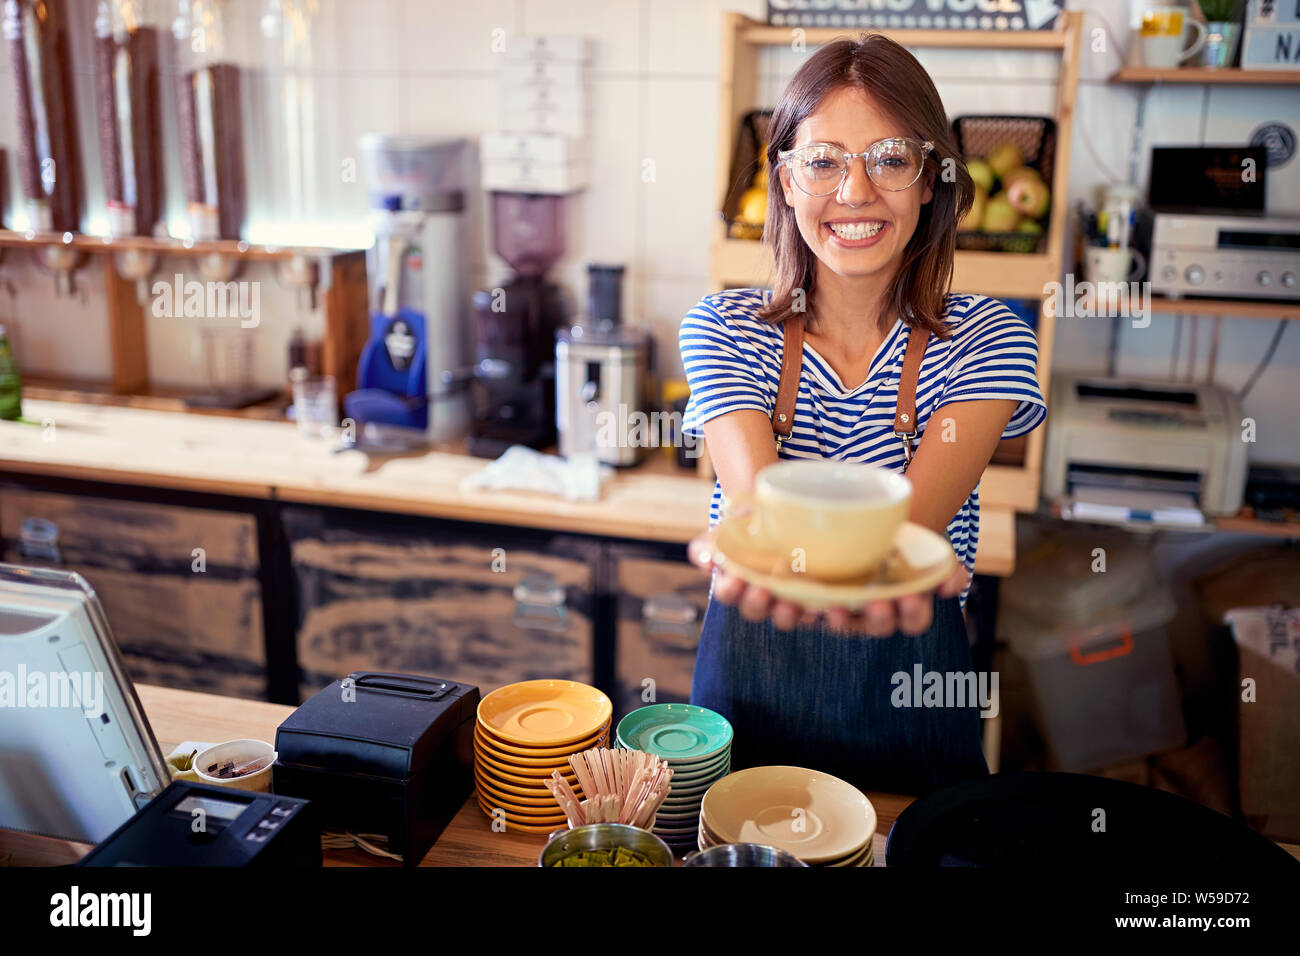 Smiling woman in cafe serving customer with coffee. Stock Photo